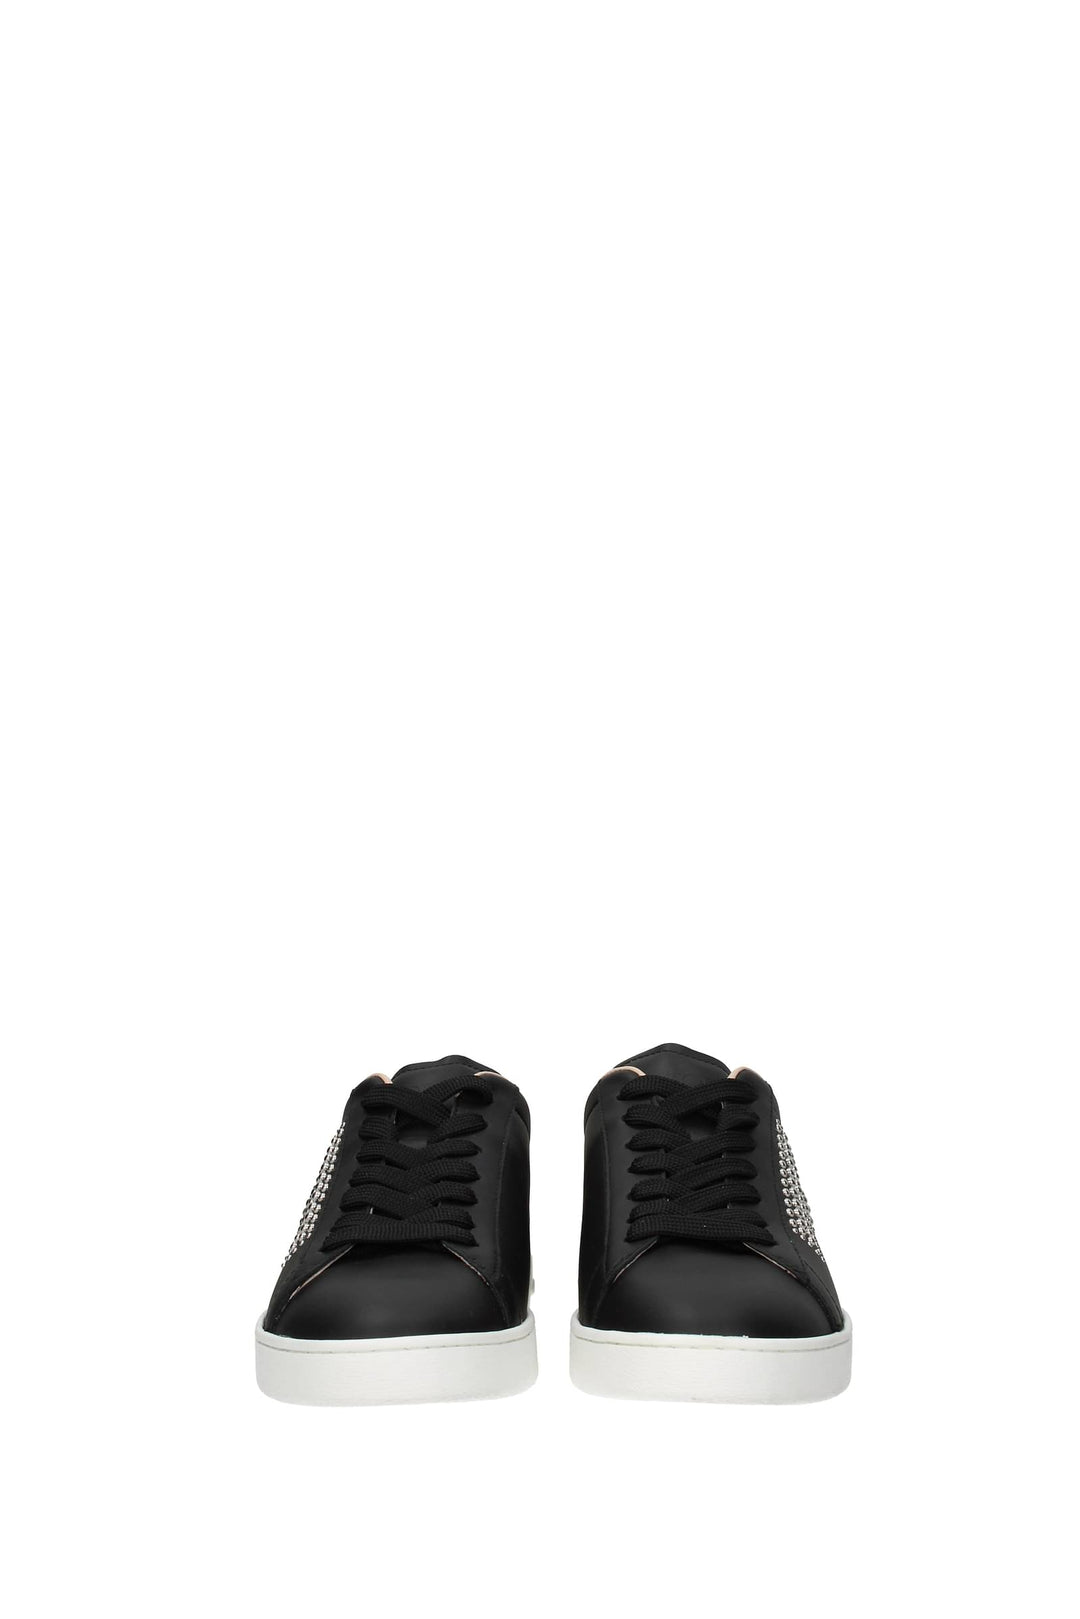 Sneakers Pelle Nero - Tod's - Donna